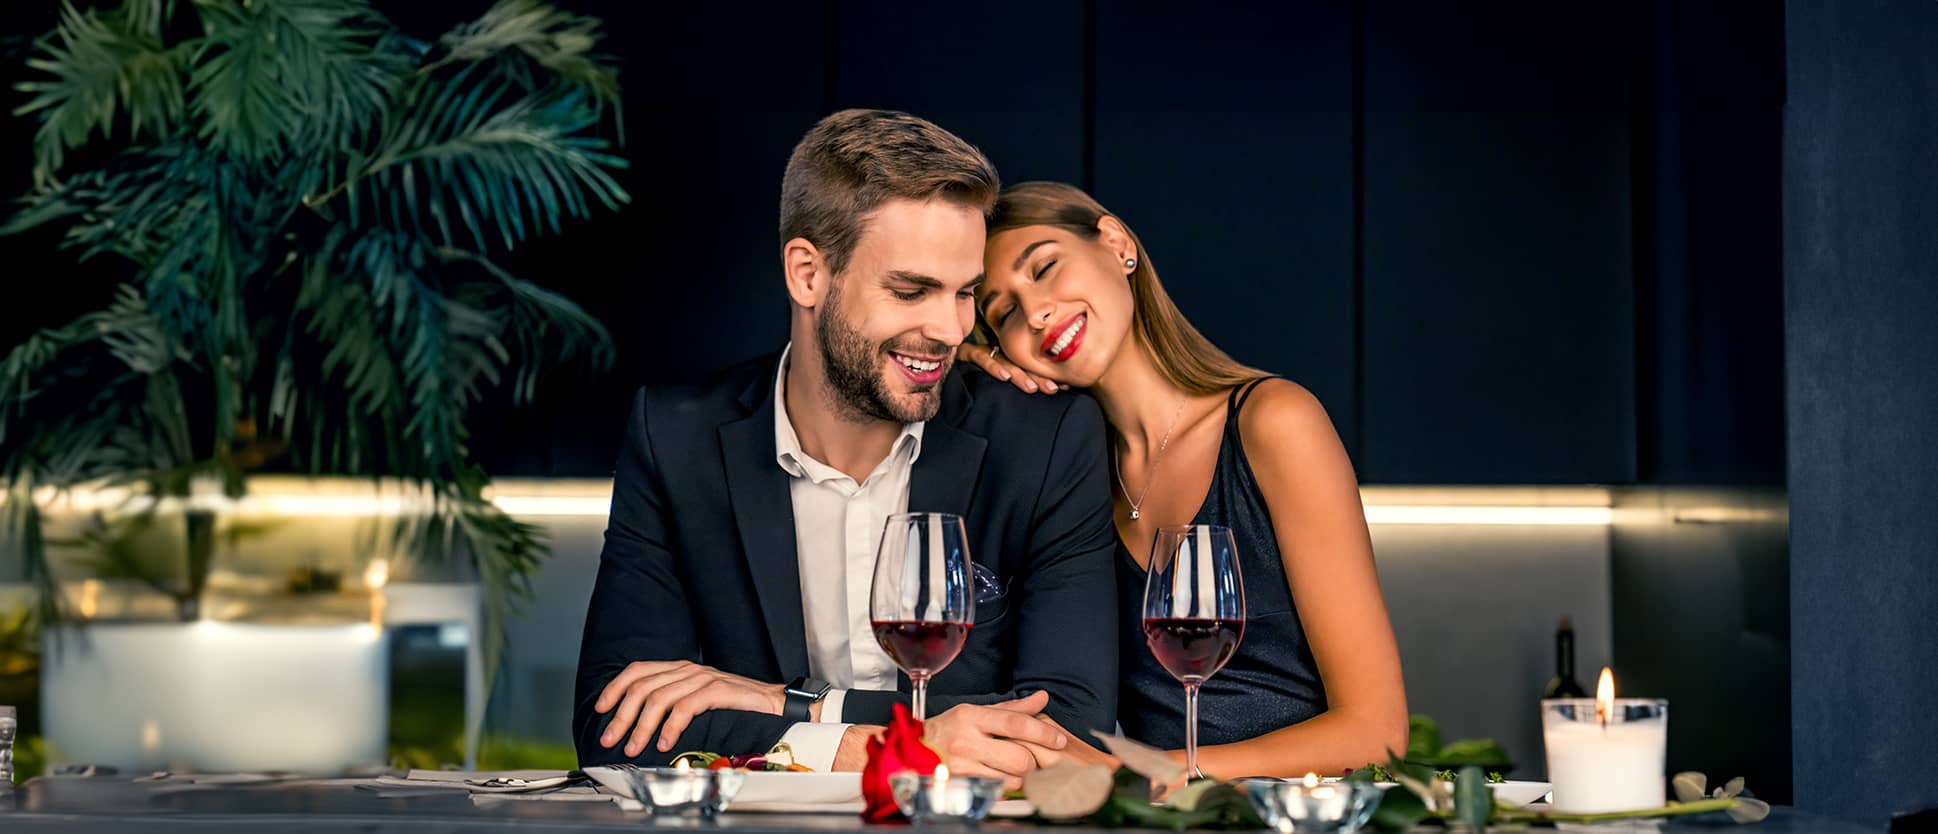 Top 5 Food Mistakes To Avoid On A First Date 